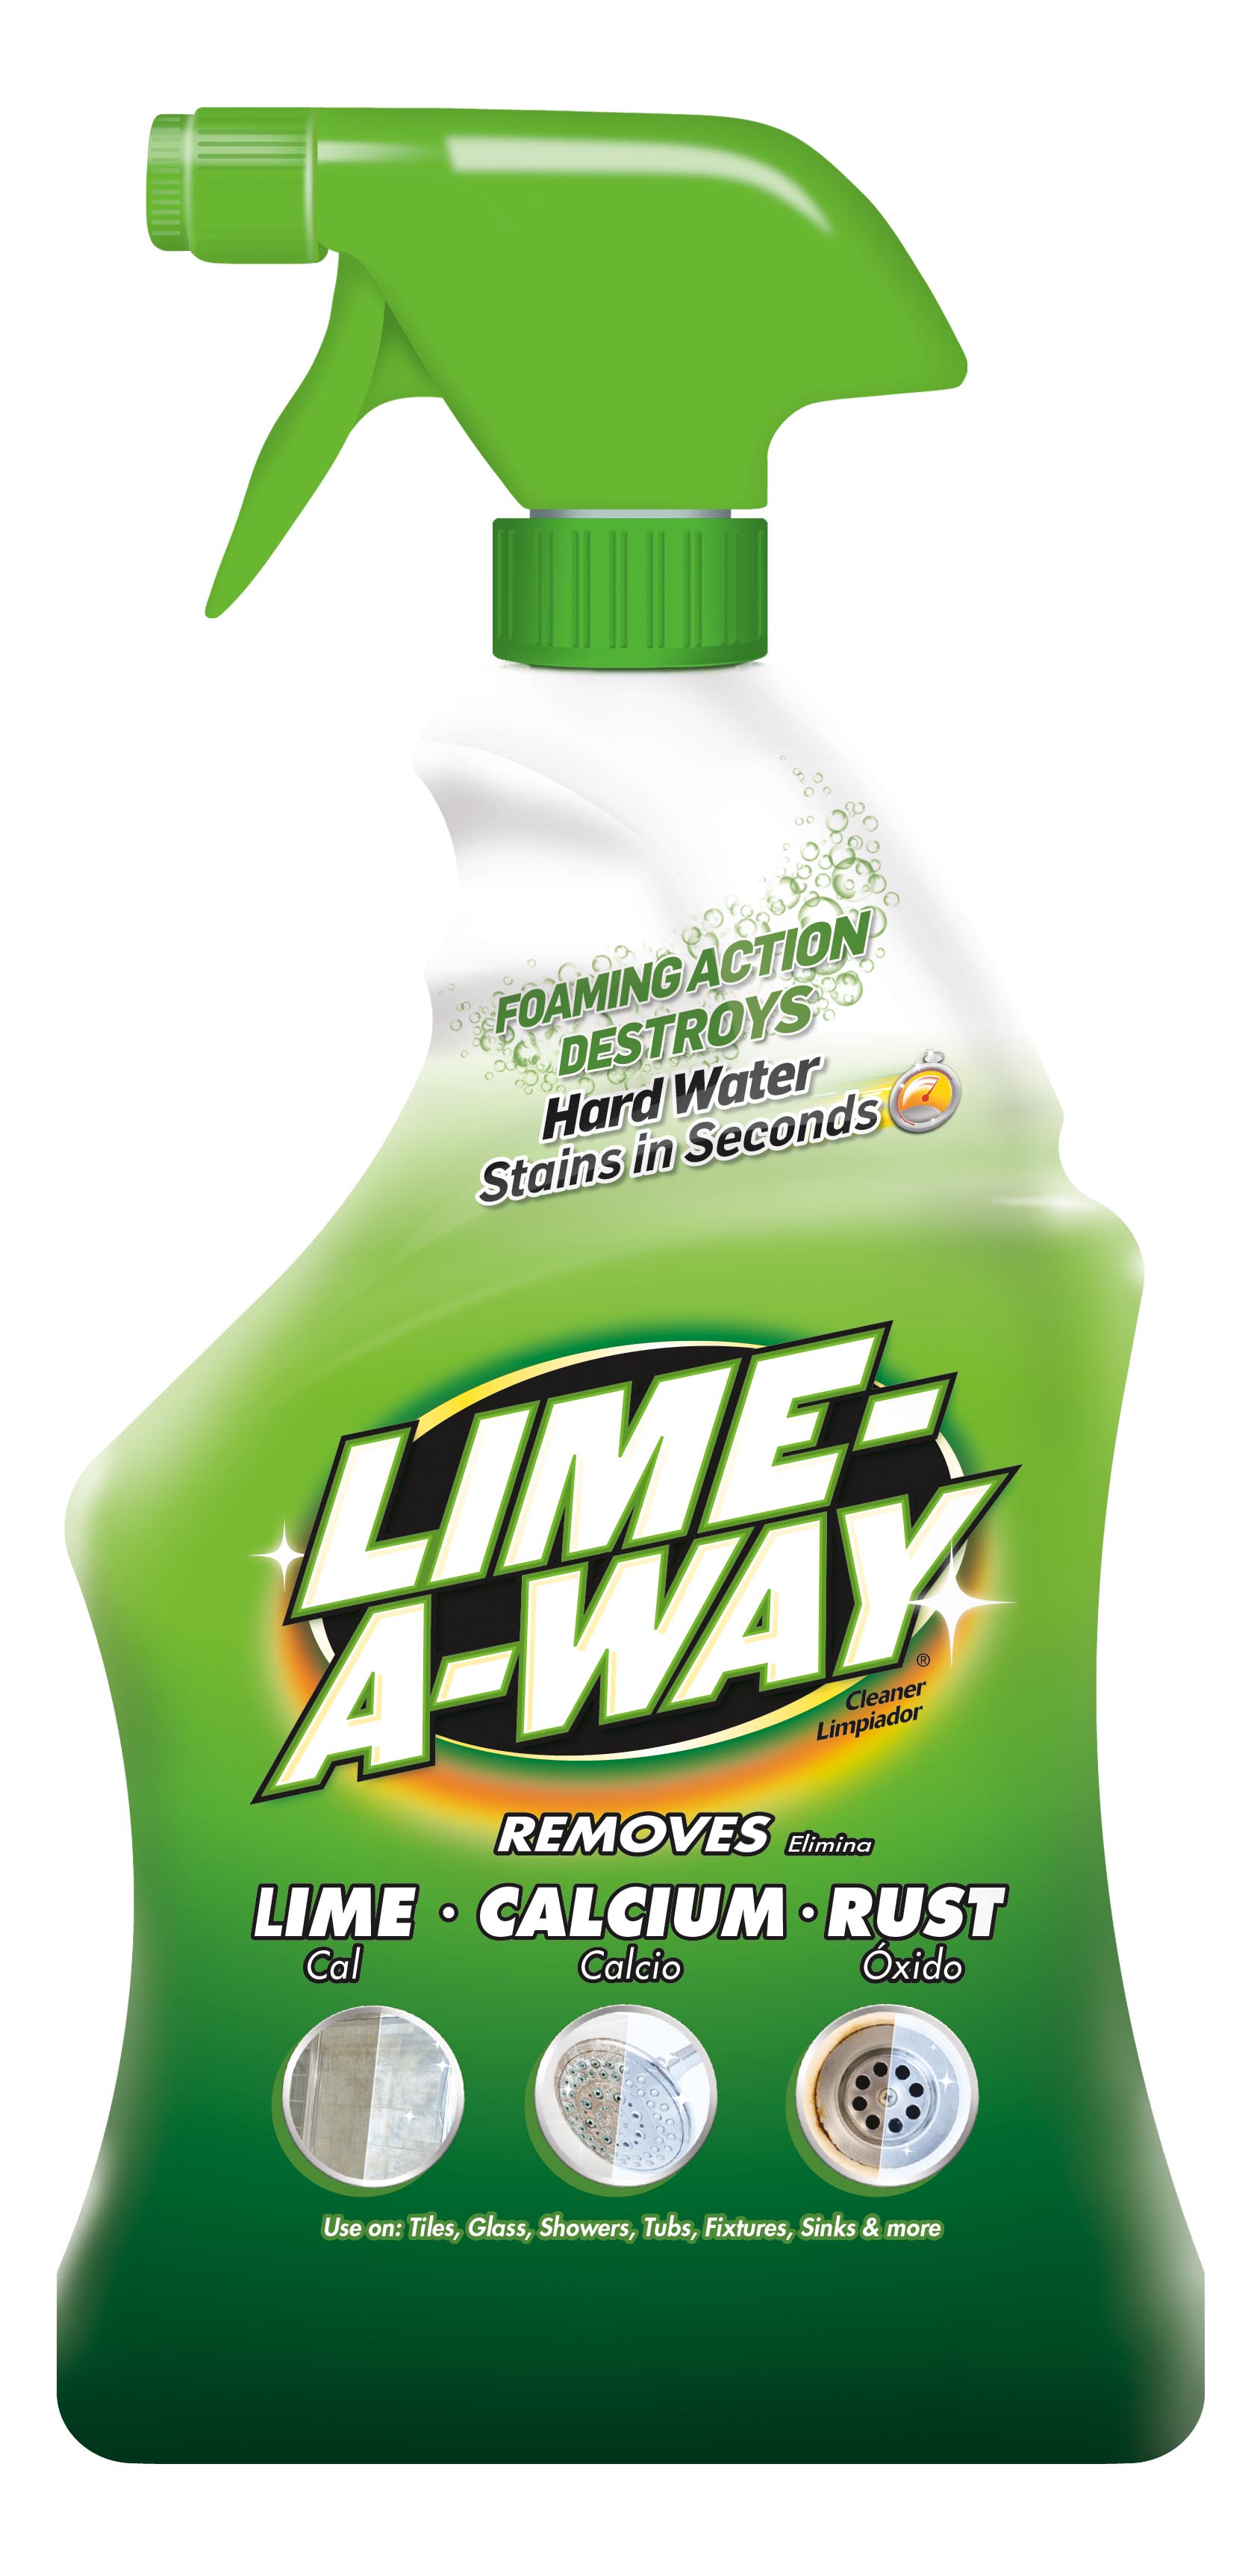 LIME-A-WAY® Cleaner - Trigger